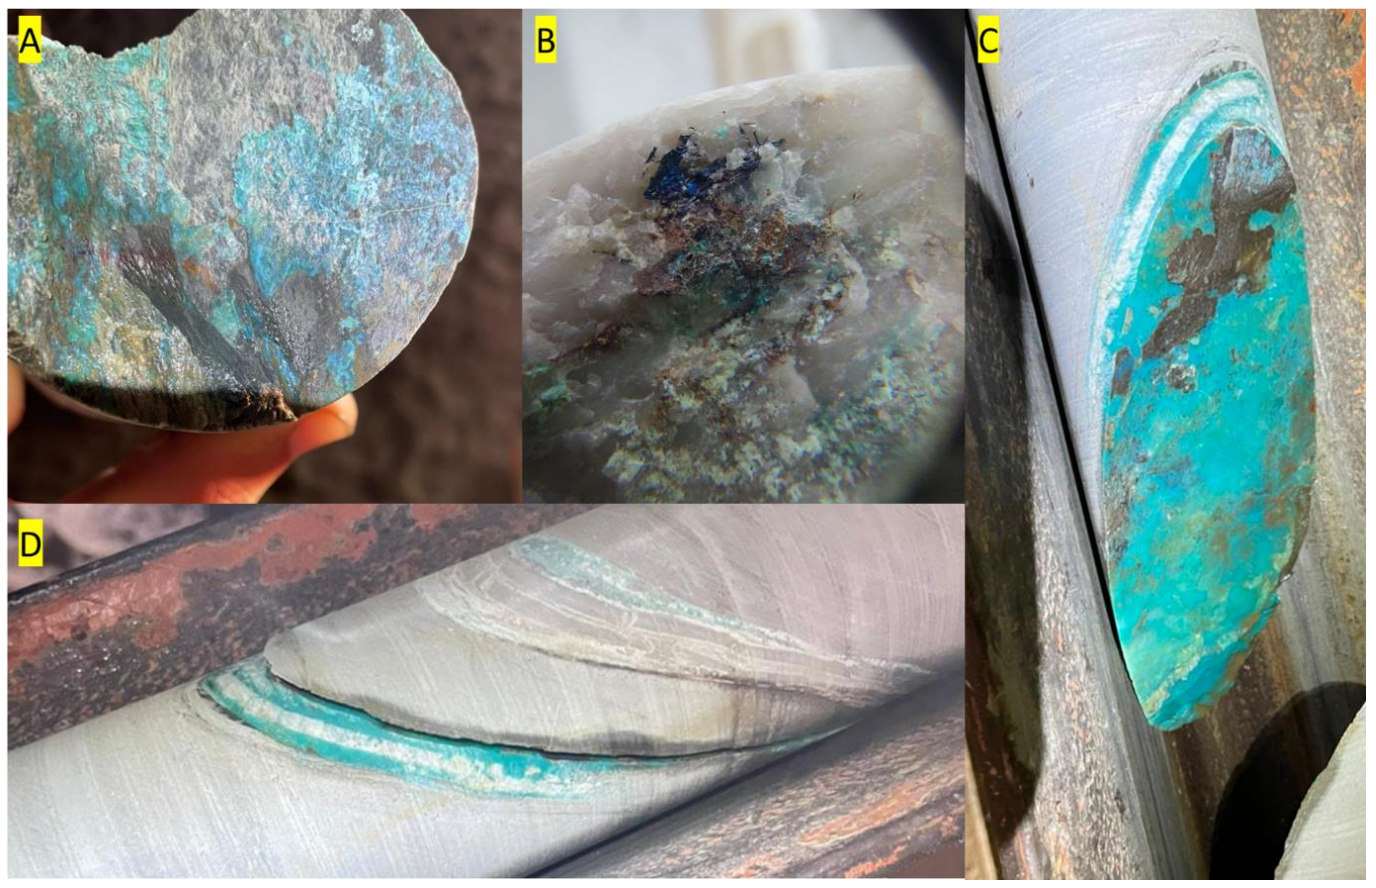 That blue colouring? That's the copper mineralisation